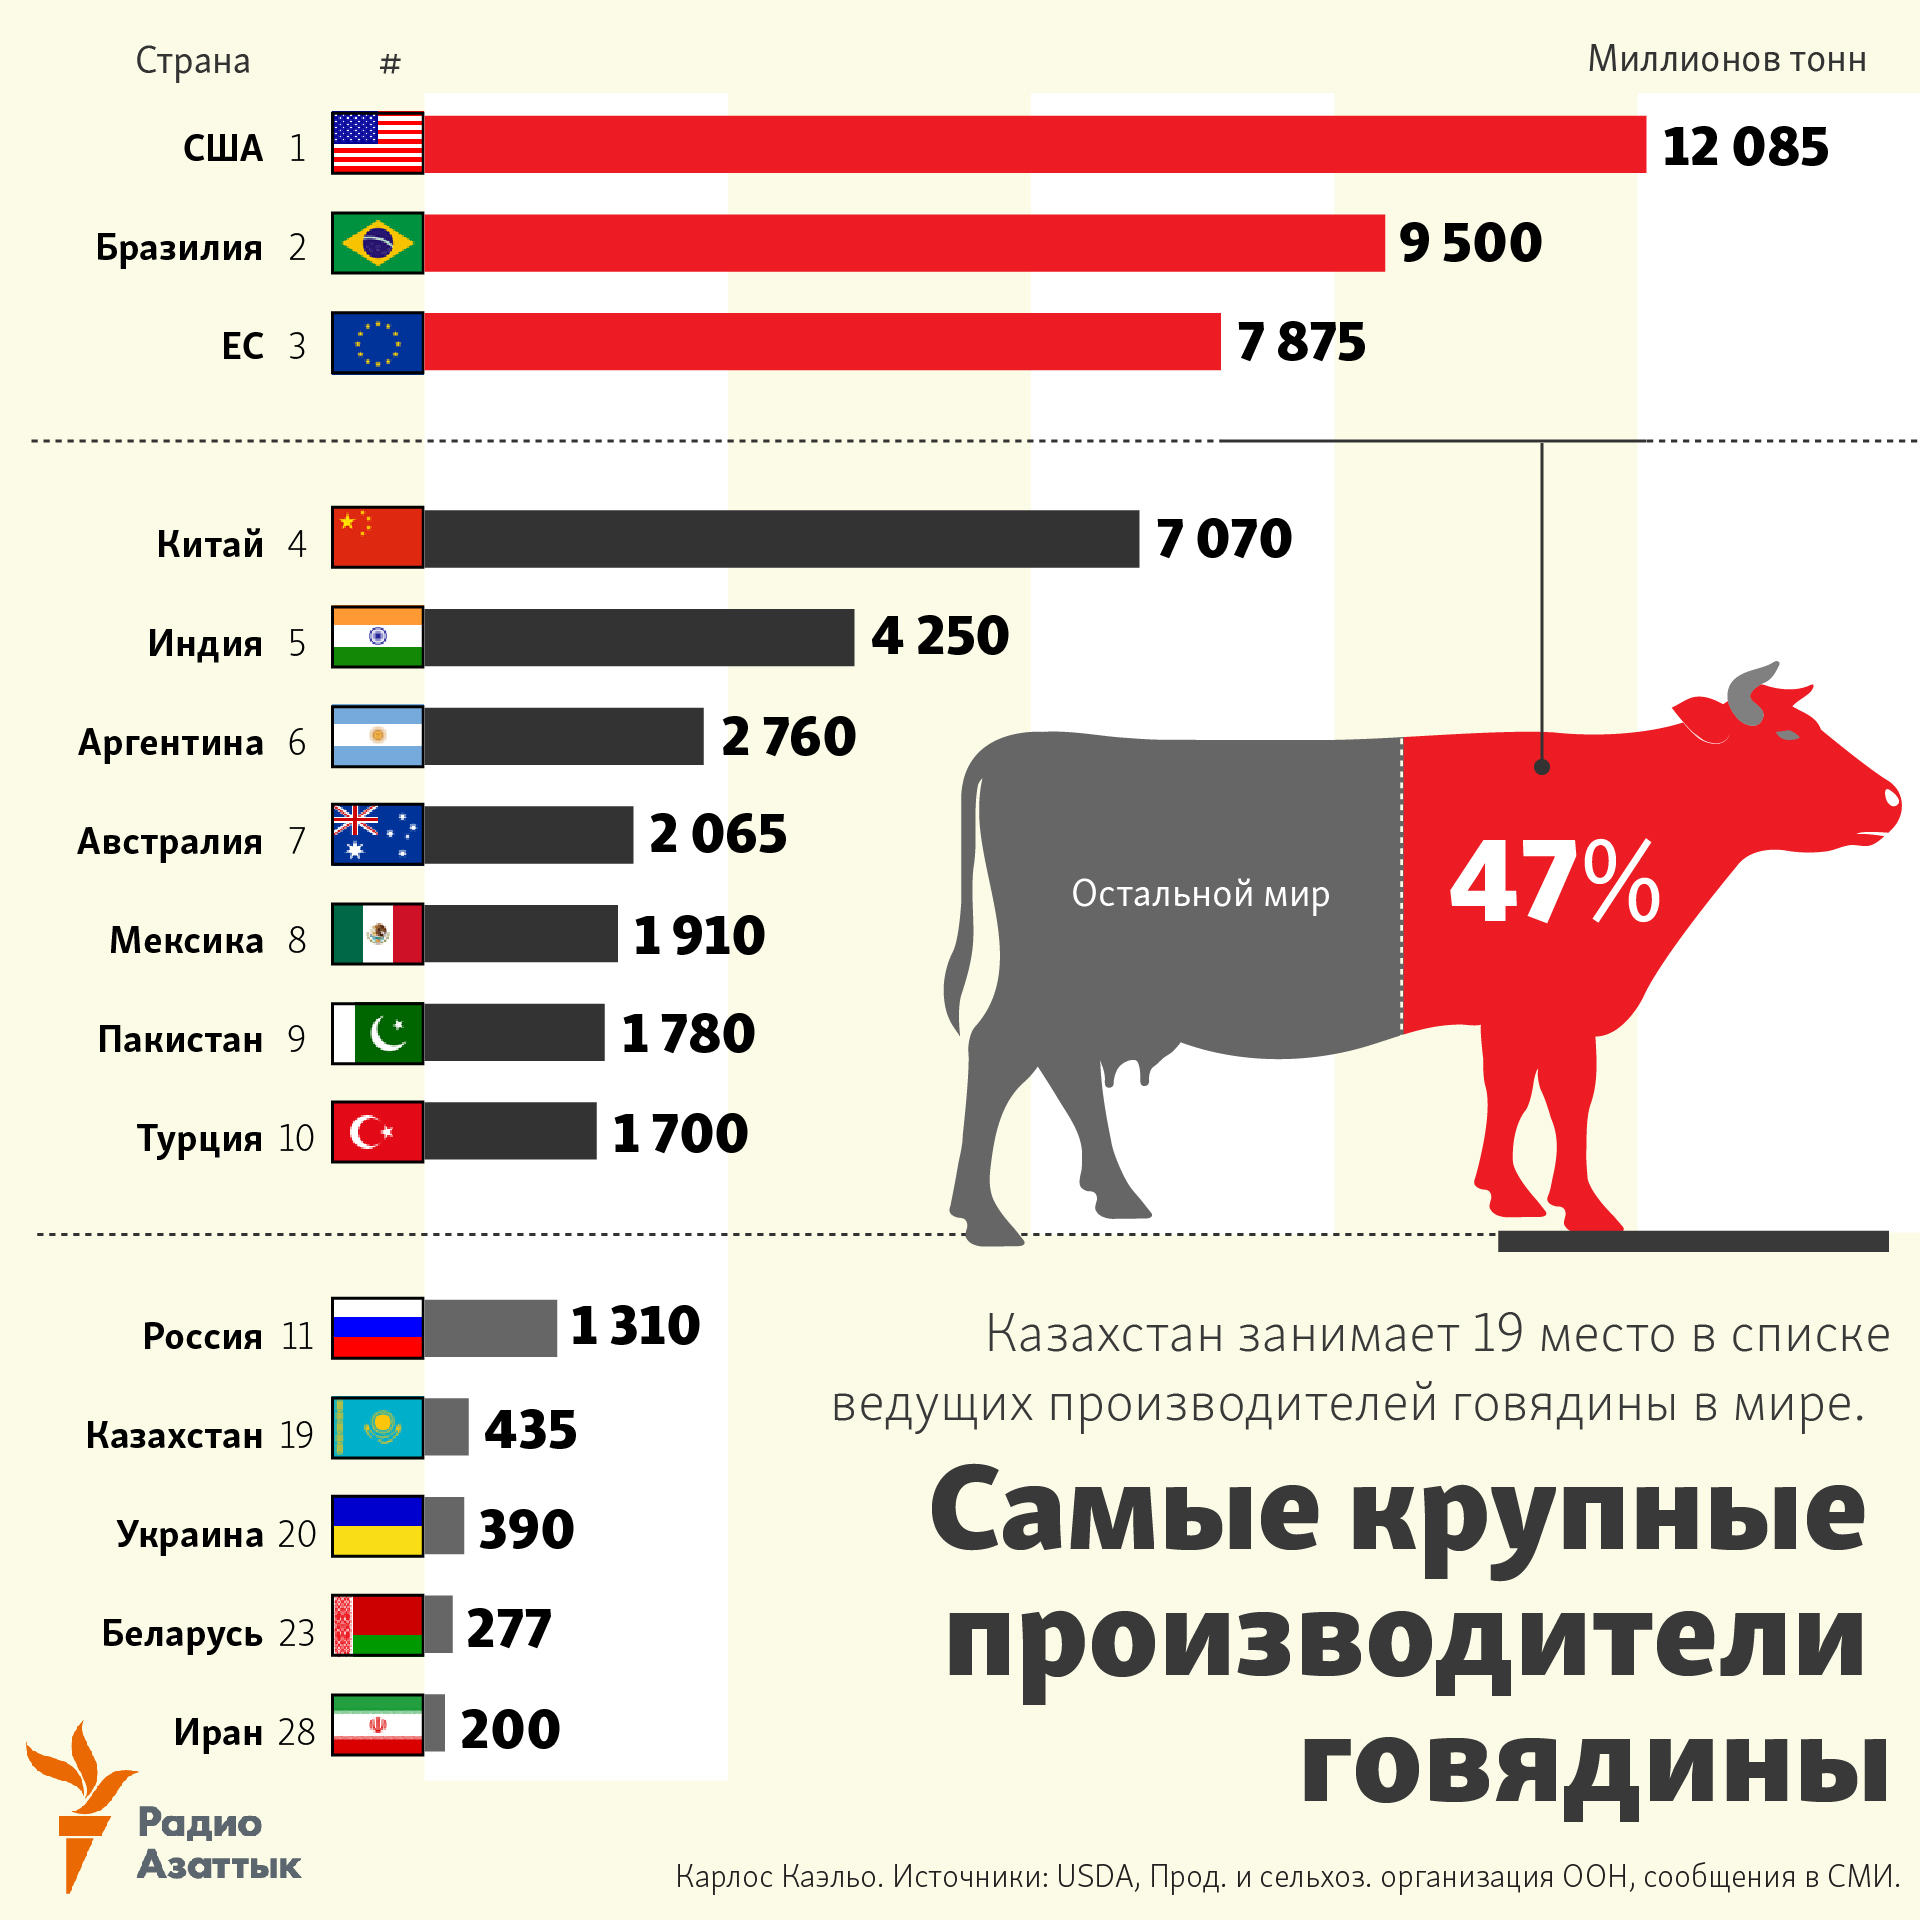 world largest beef exporter country